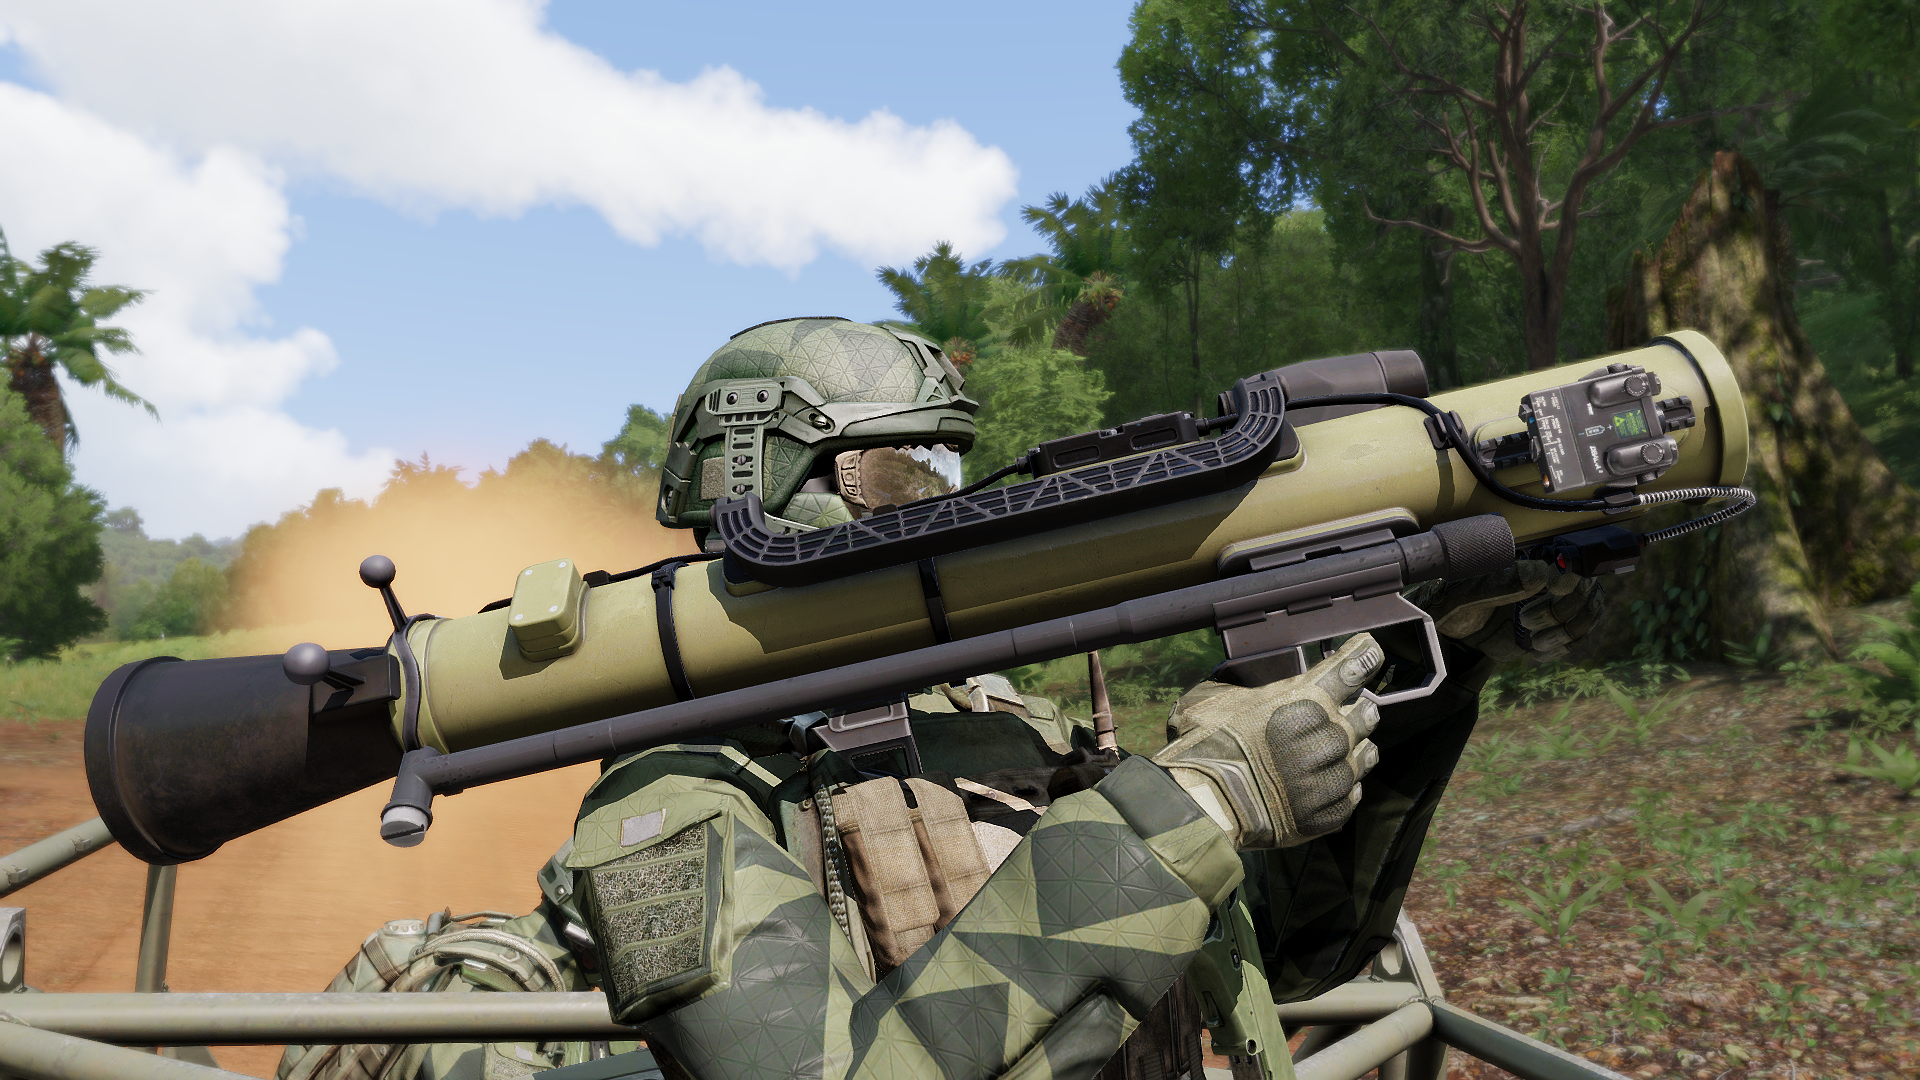 Arma 3 ACE3 Sniper Tutorial (Very Quick, Simple, & Easy 12 Steps